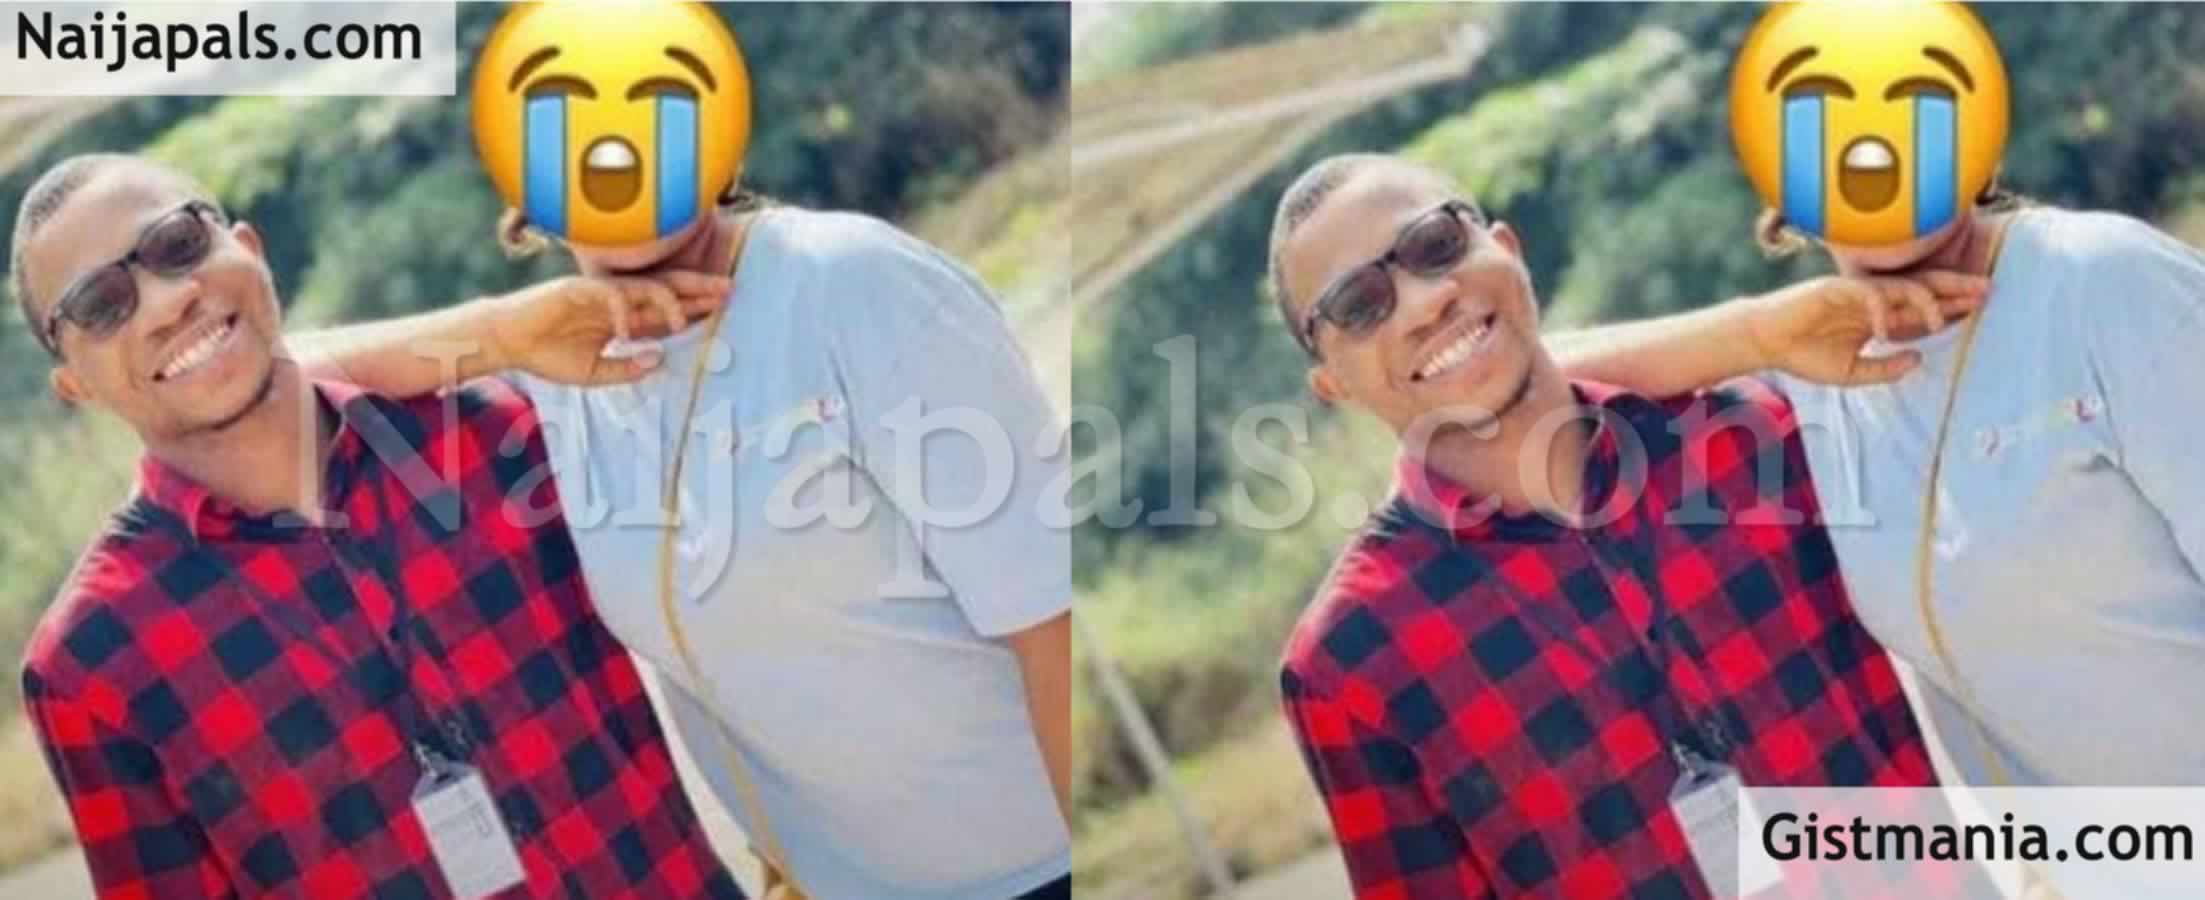 final-year-student-of-oko-poly-anambra-commits-suicide-after-he-was-jilted-by-his-lover-gistmania